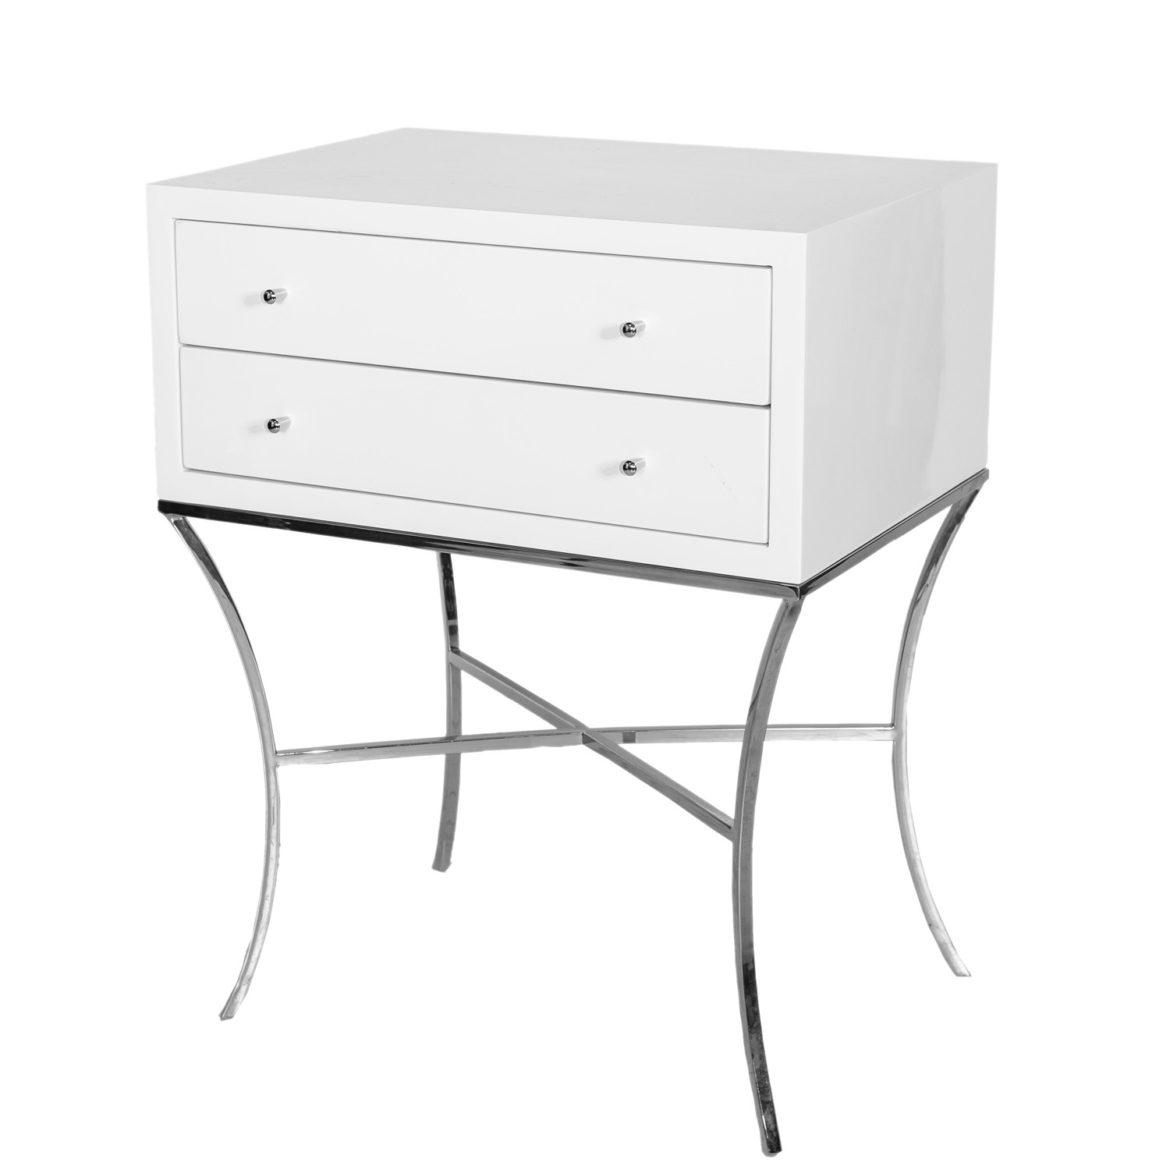 White Lacquer Side Table with Nickel base.